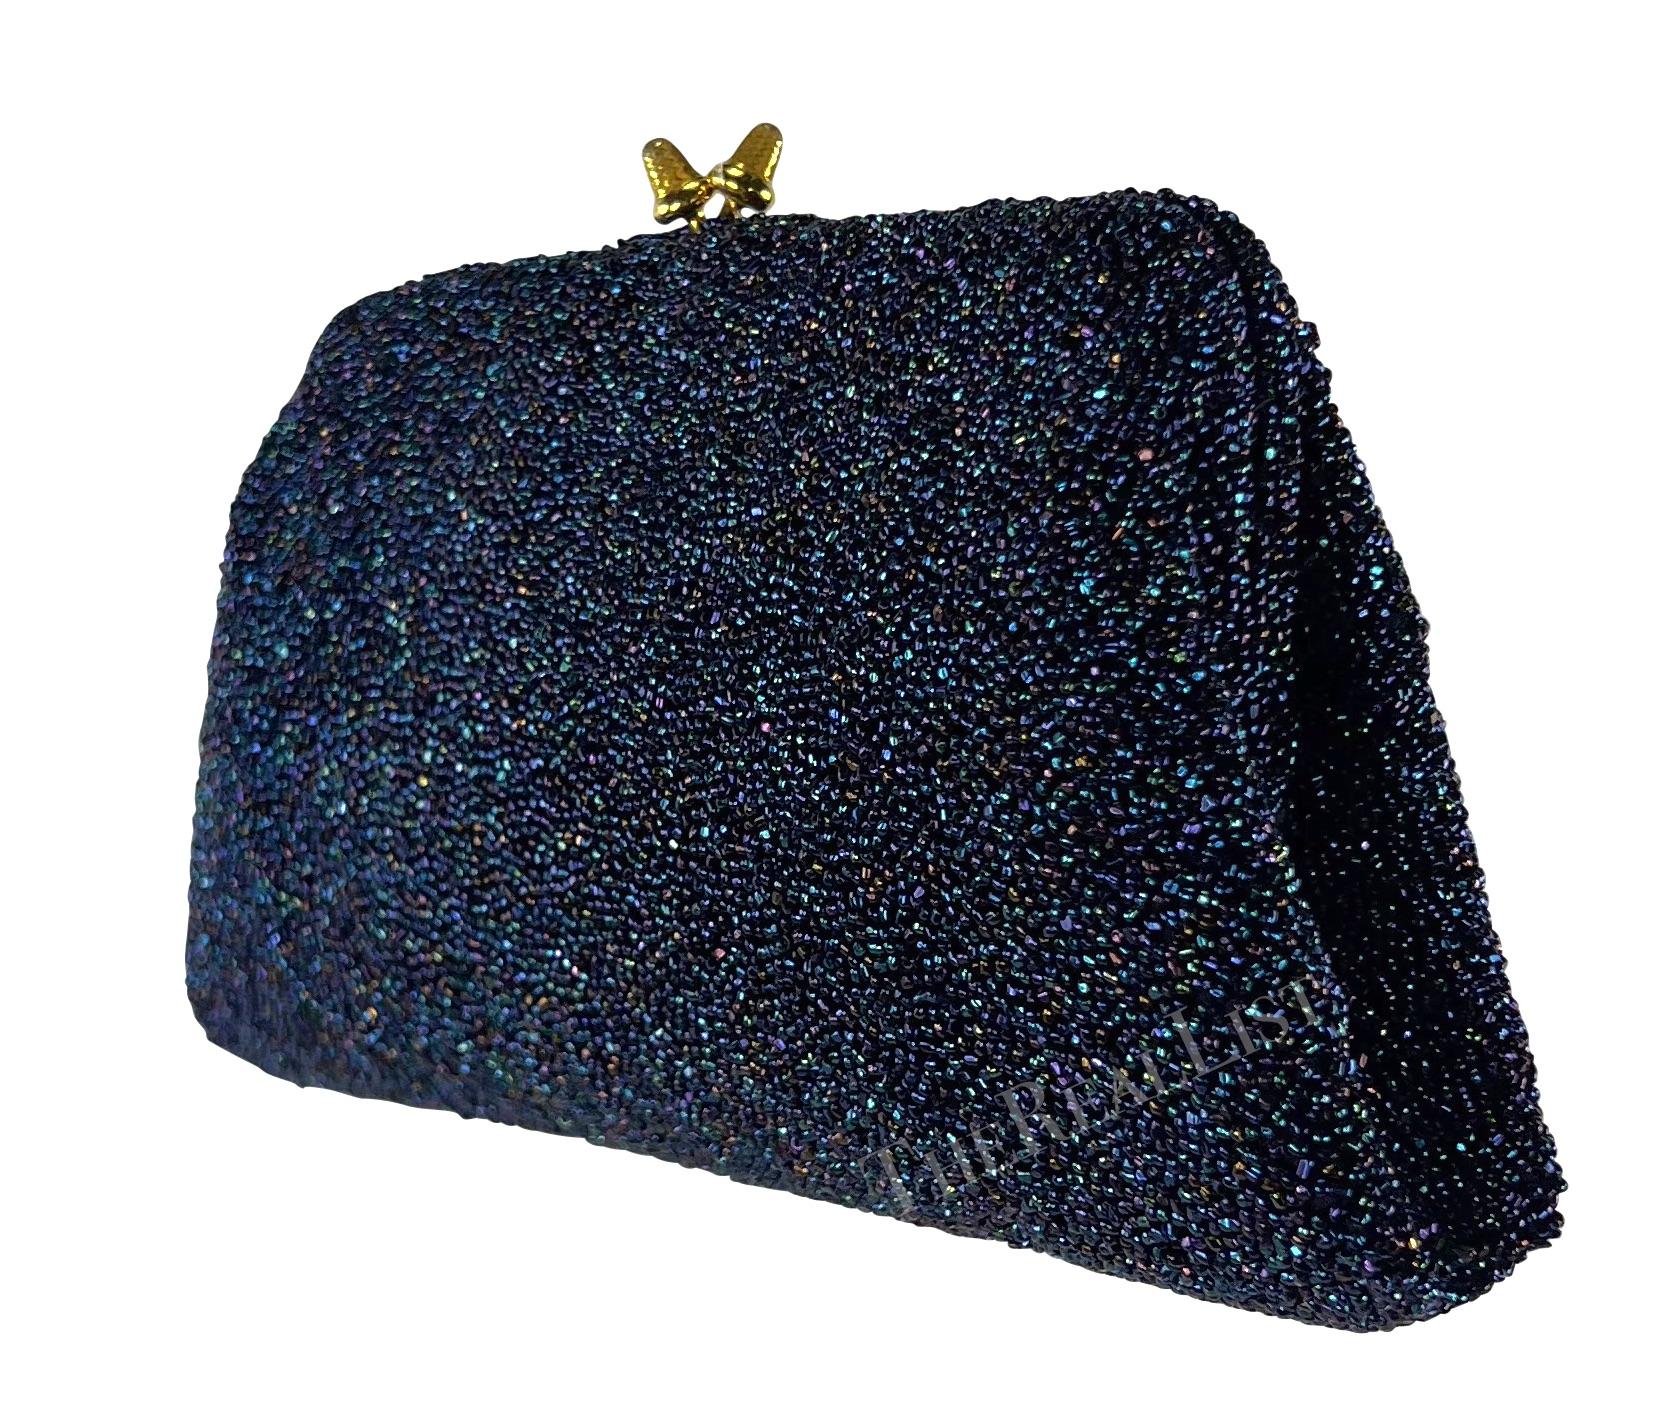 1970s Gucci Iridescent Blue Caviar Beaded Mini Evening Kiss-Lock Clutch In Excellent Condition For Sale In West Hollywood, CA